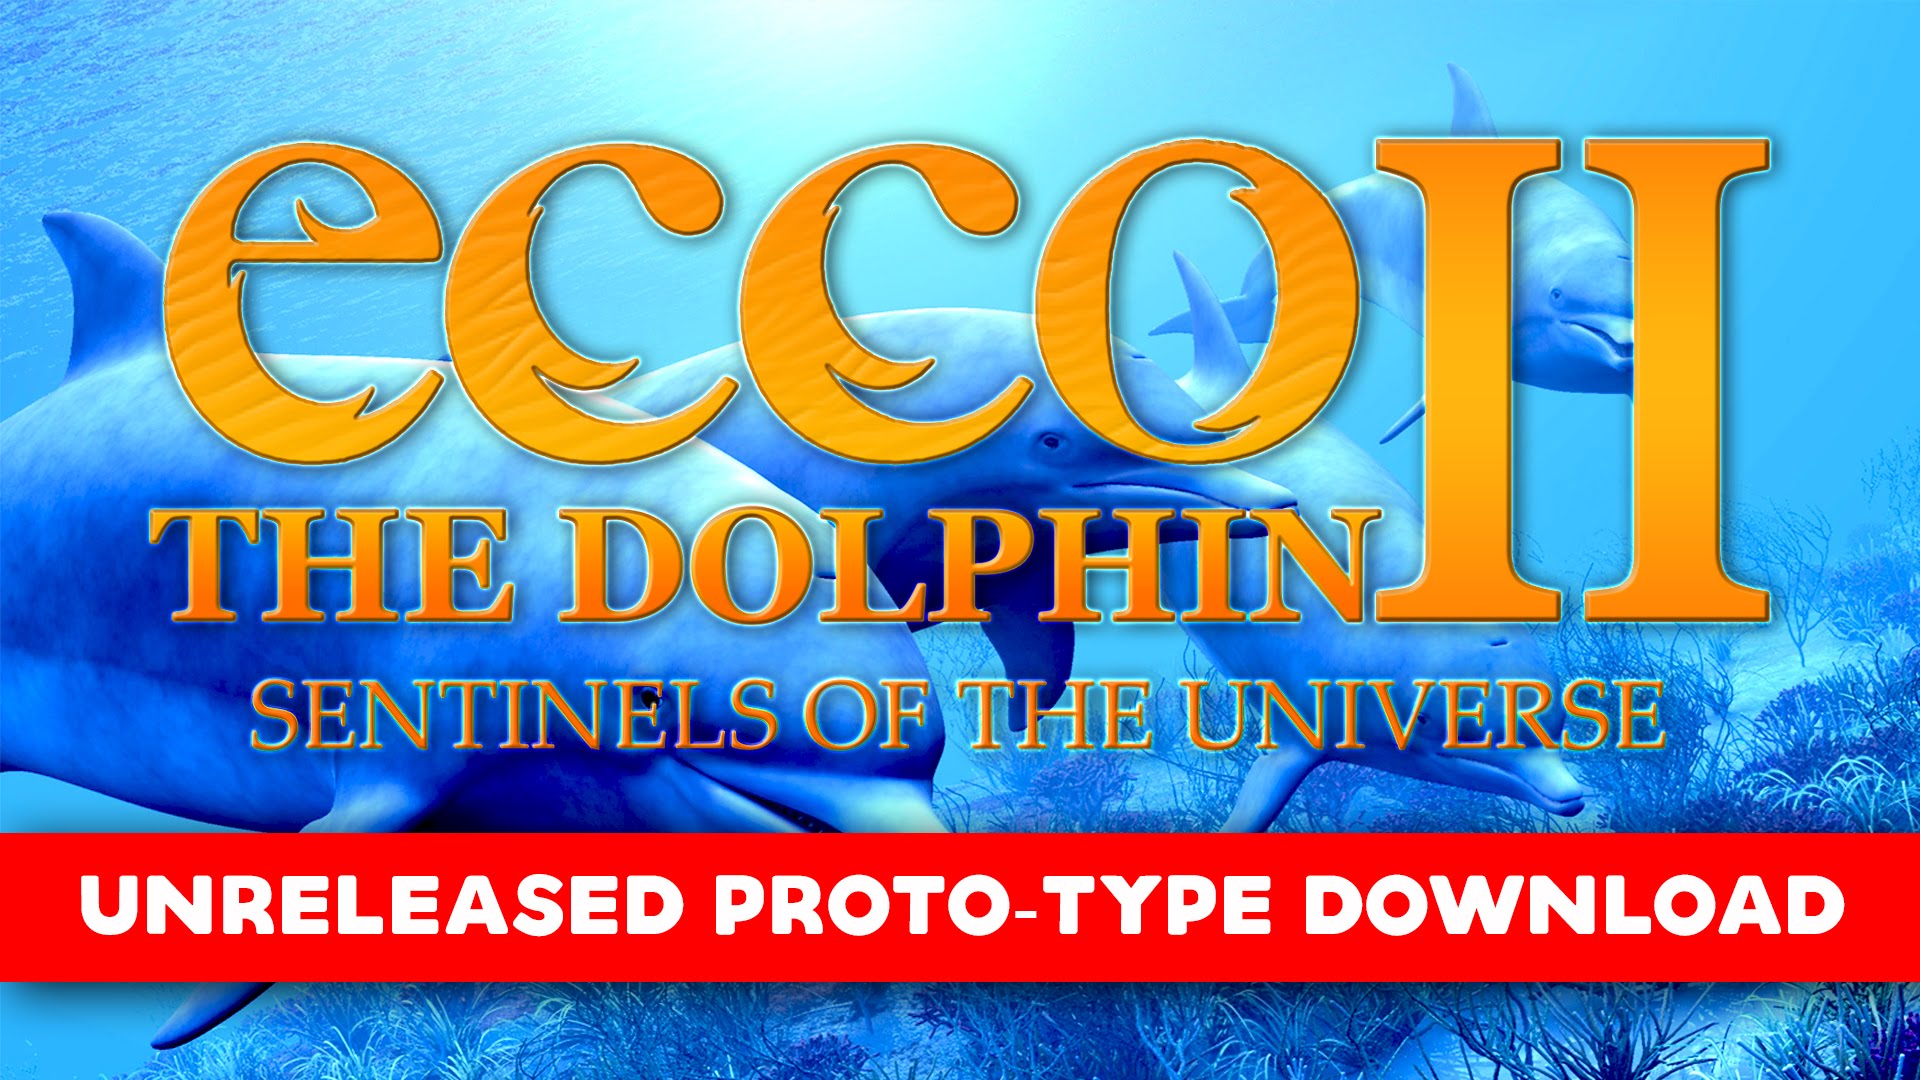 Ecco the Dolphin II: Sentinels of the Universe